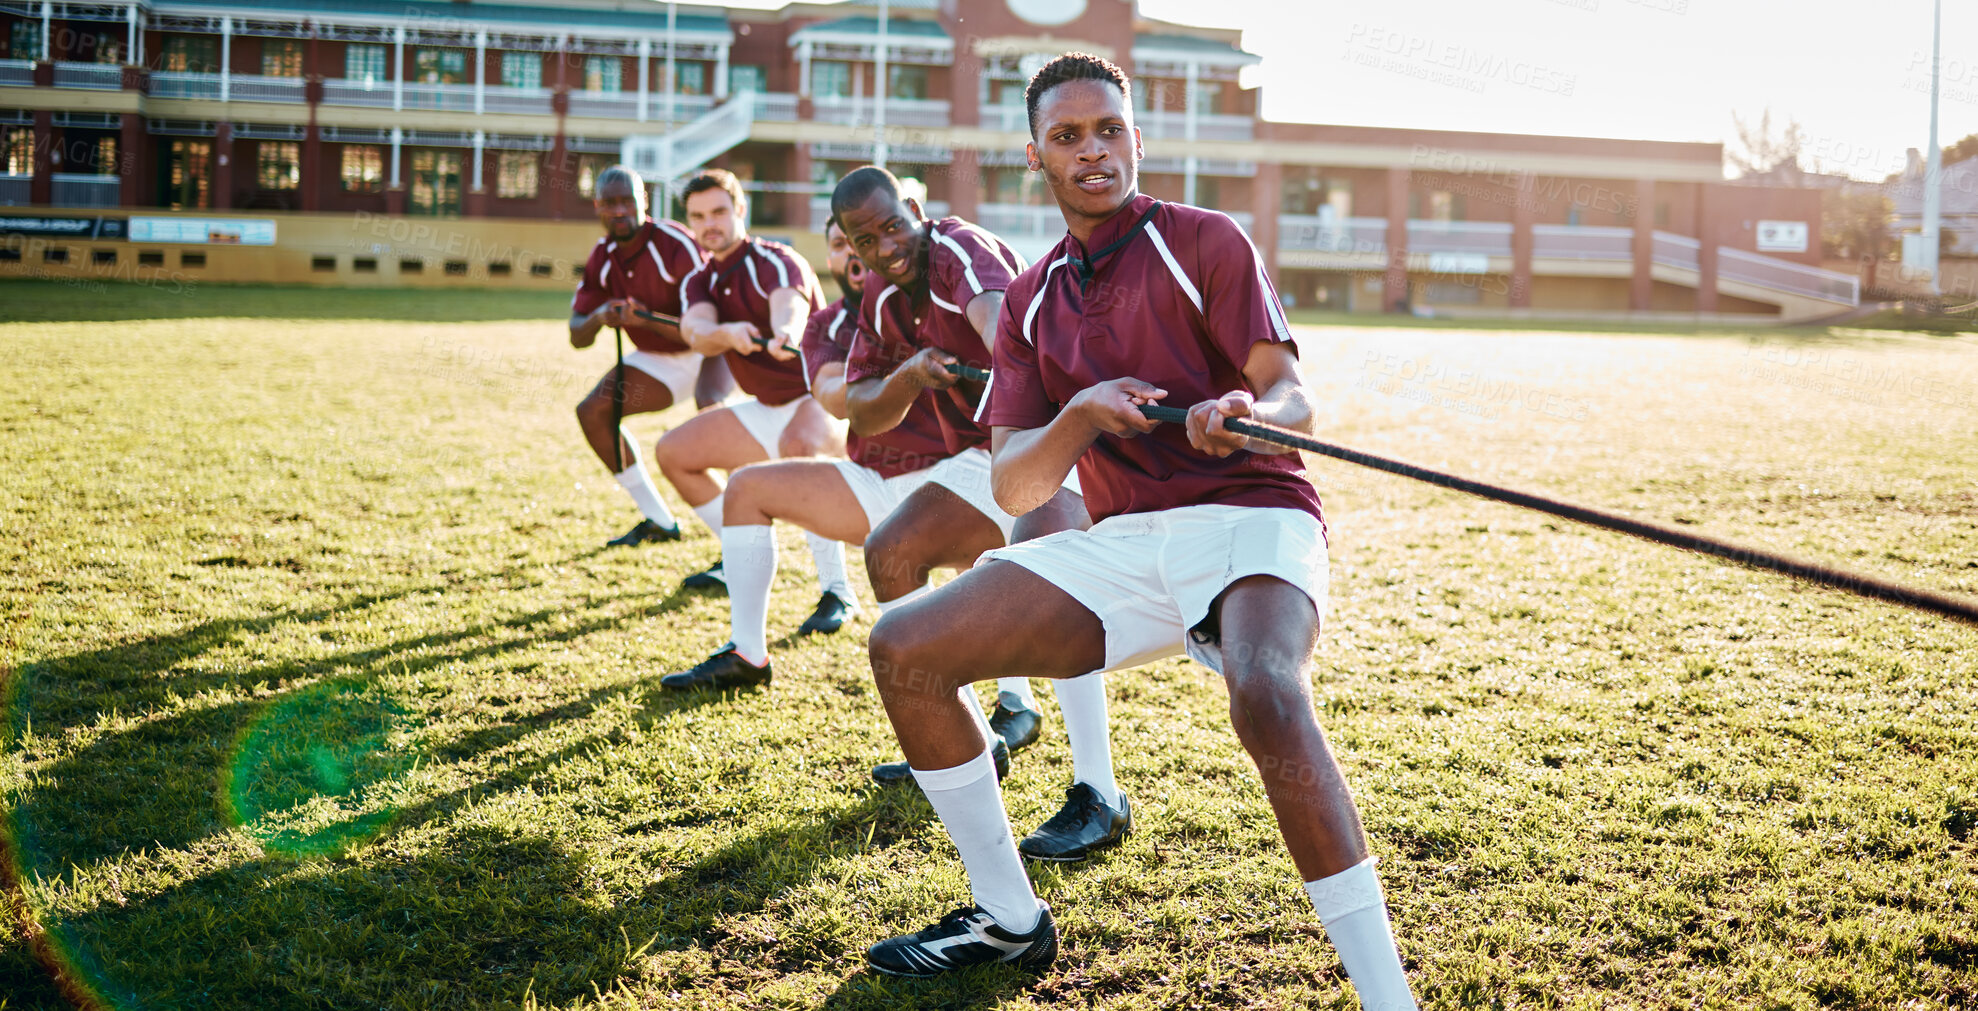 Buy stock photo Man, team and sports tug of war with rope for fitness exercise, strength challenge or competition on field. Sport men in rivalry, teamwork struggle or leadership pulling ropes in training activity